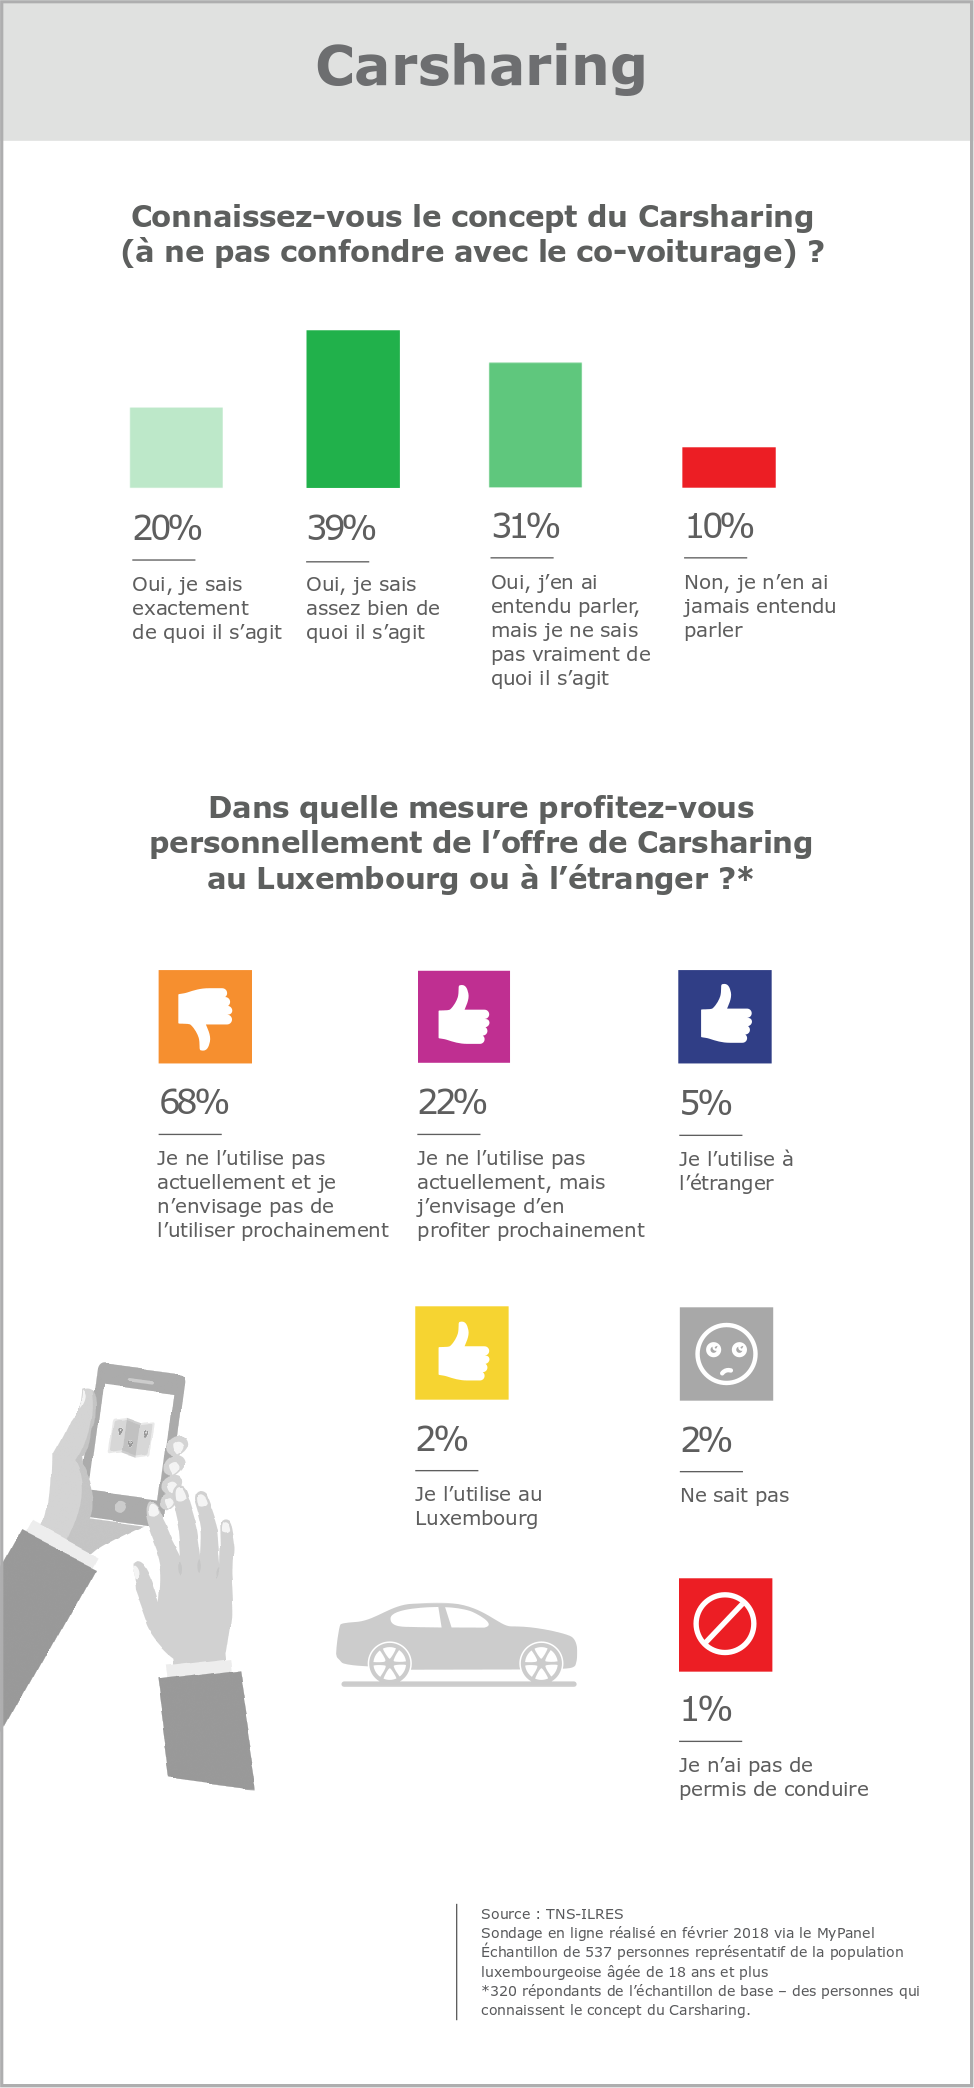 Le concept du Carsharing au Luxembourg